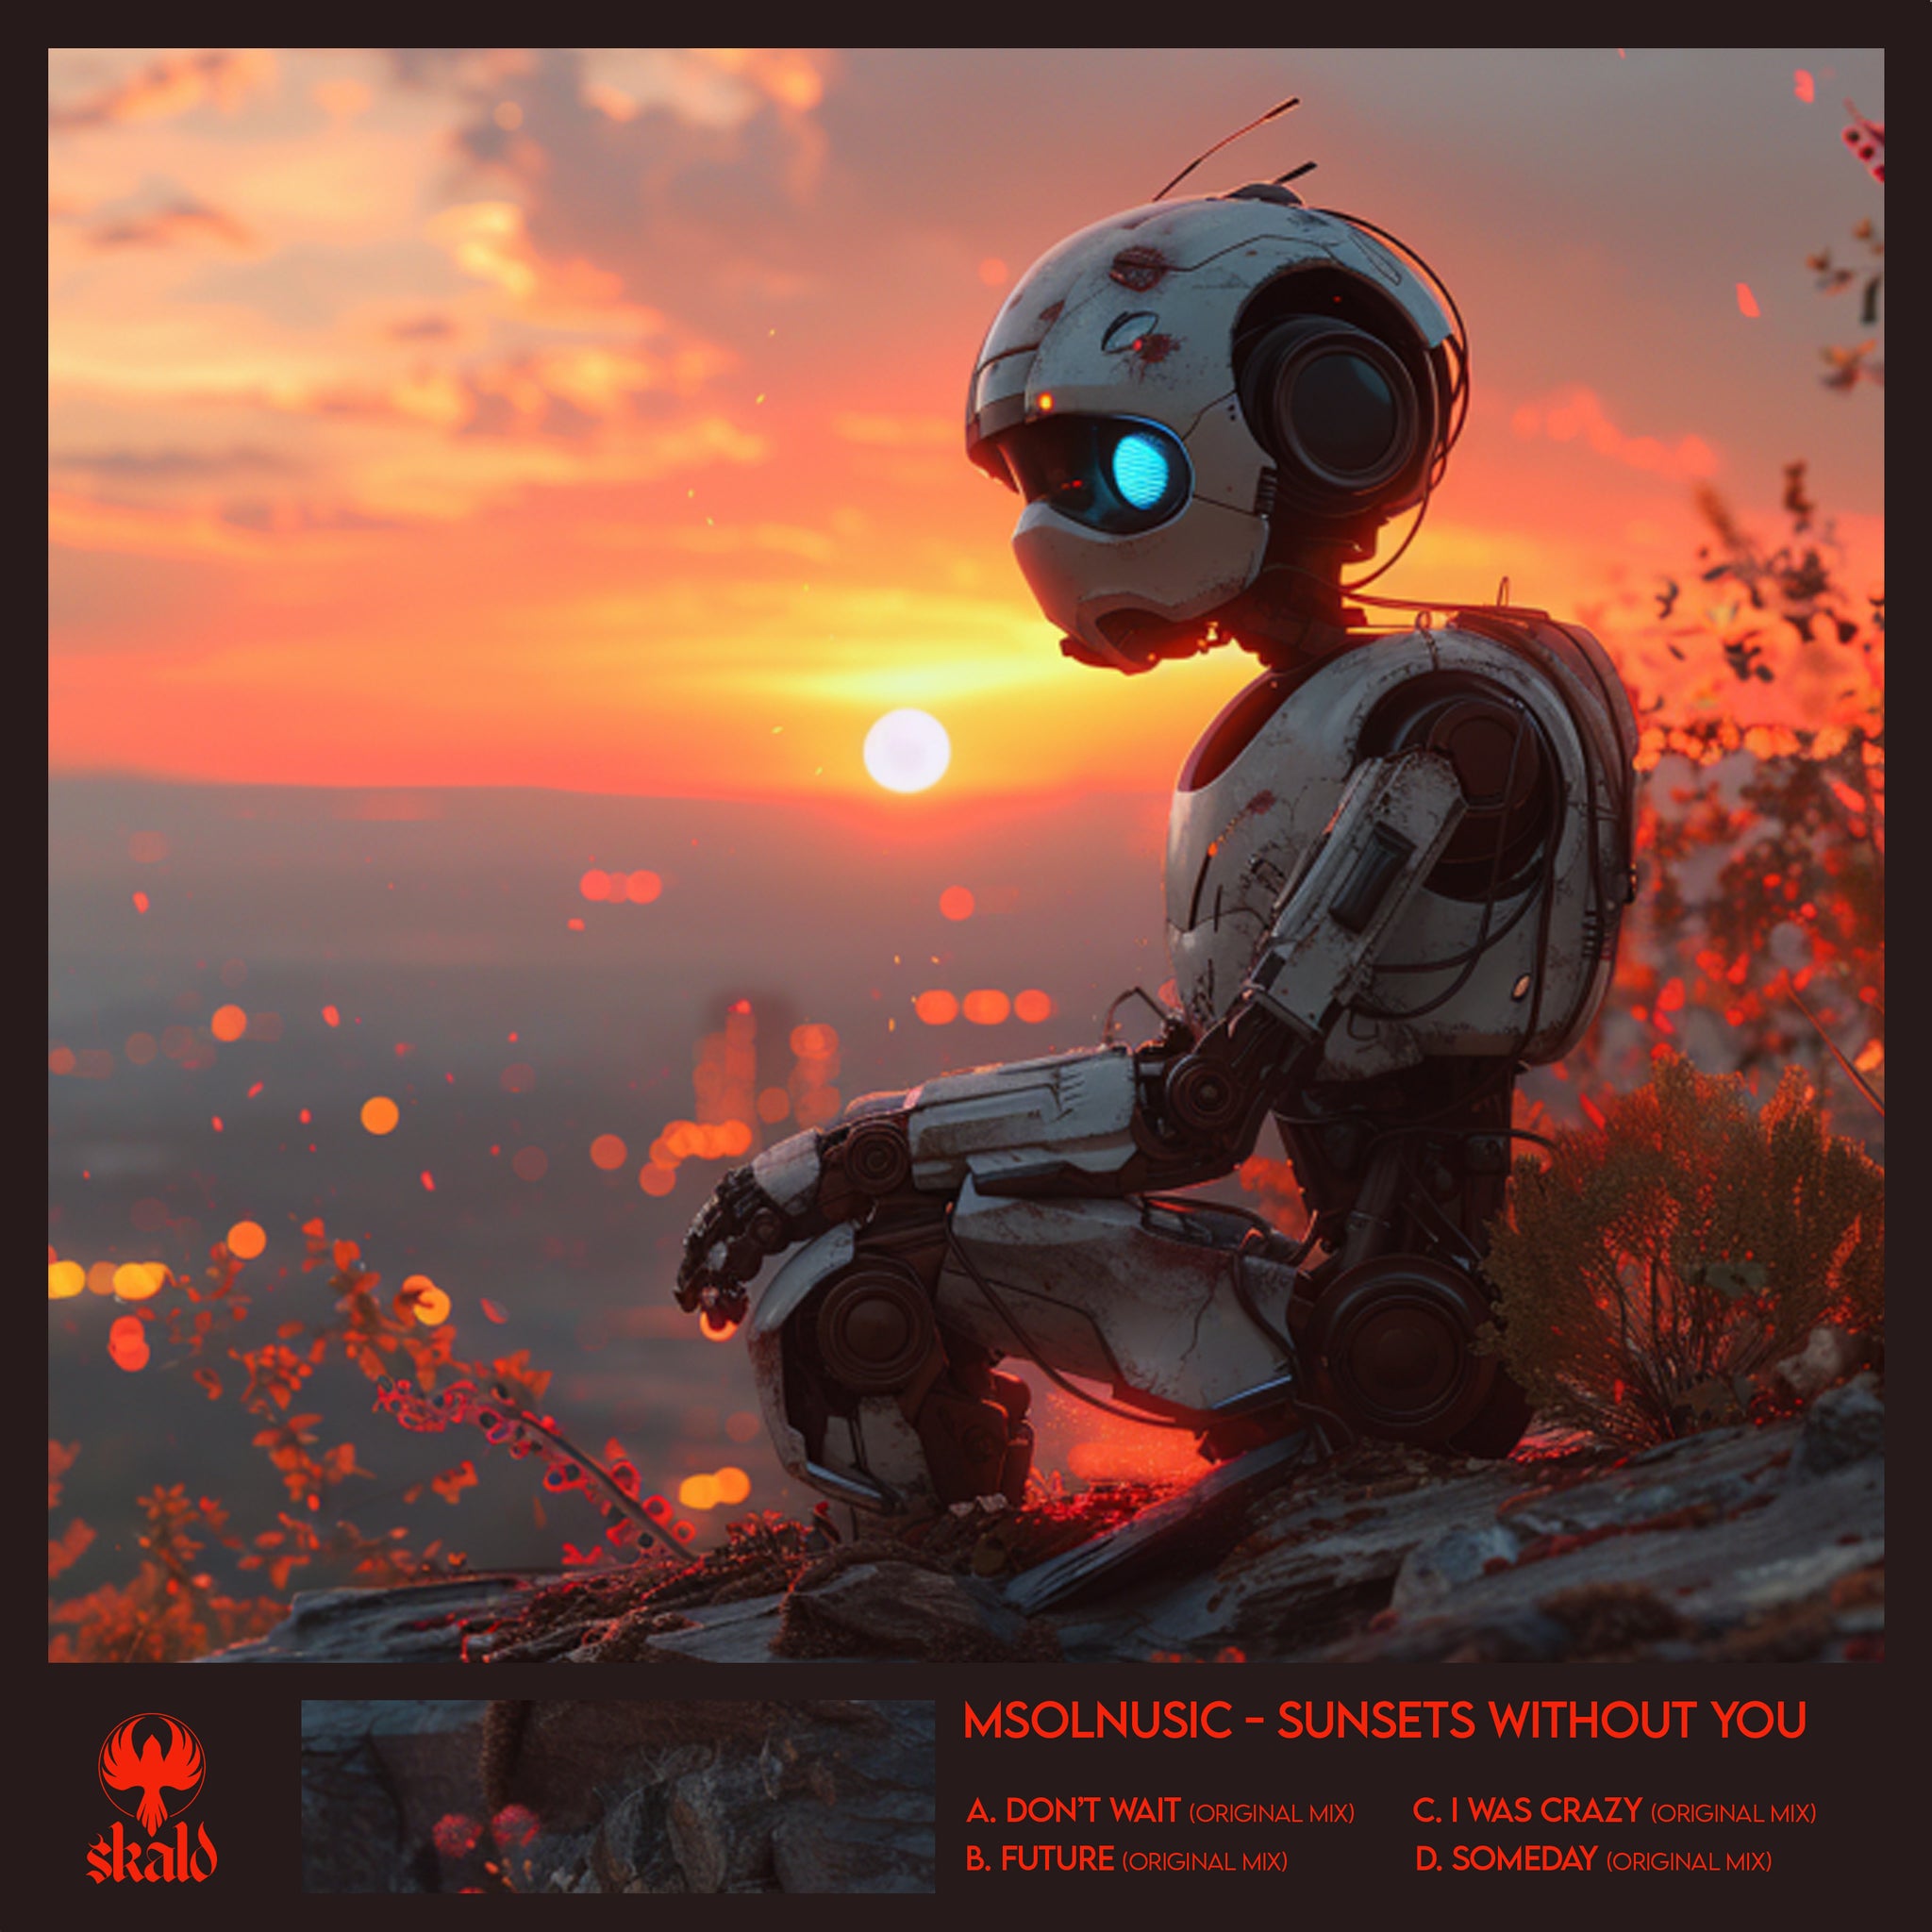 Msolnusic - Sunsets Without You EP